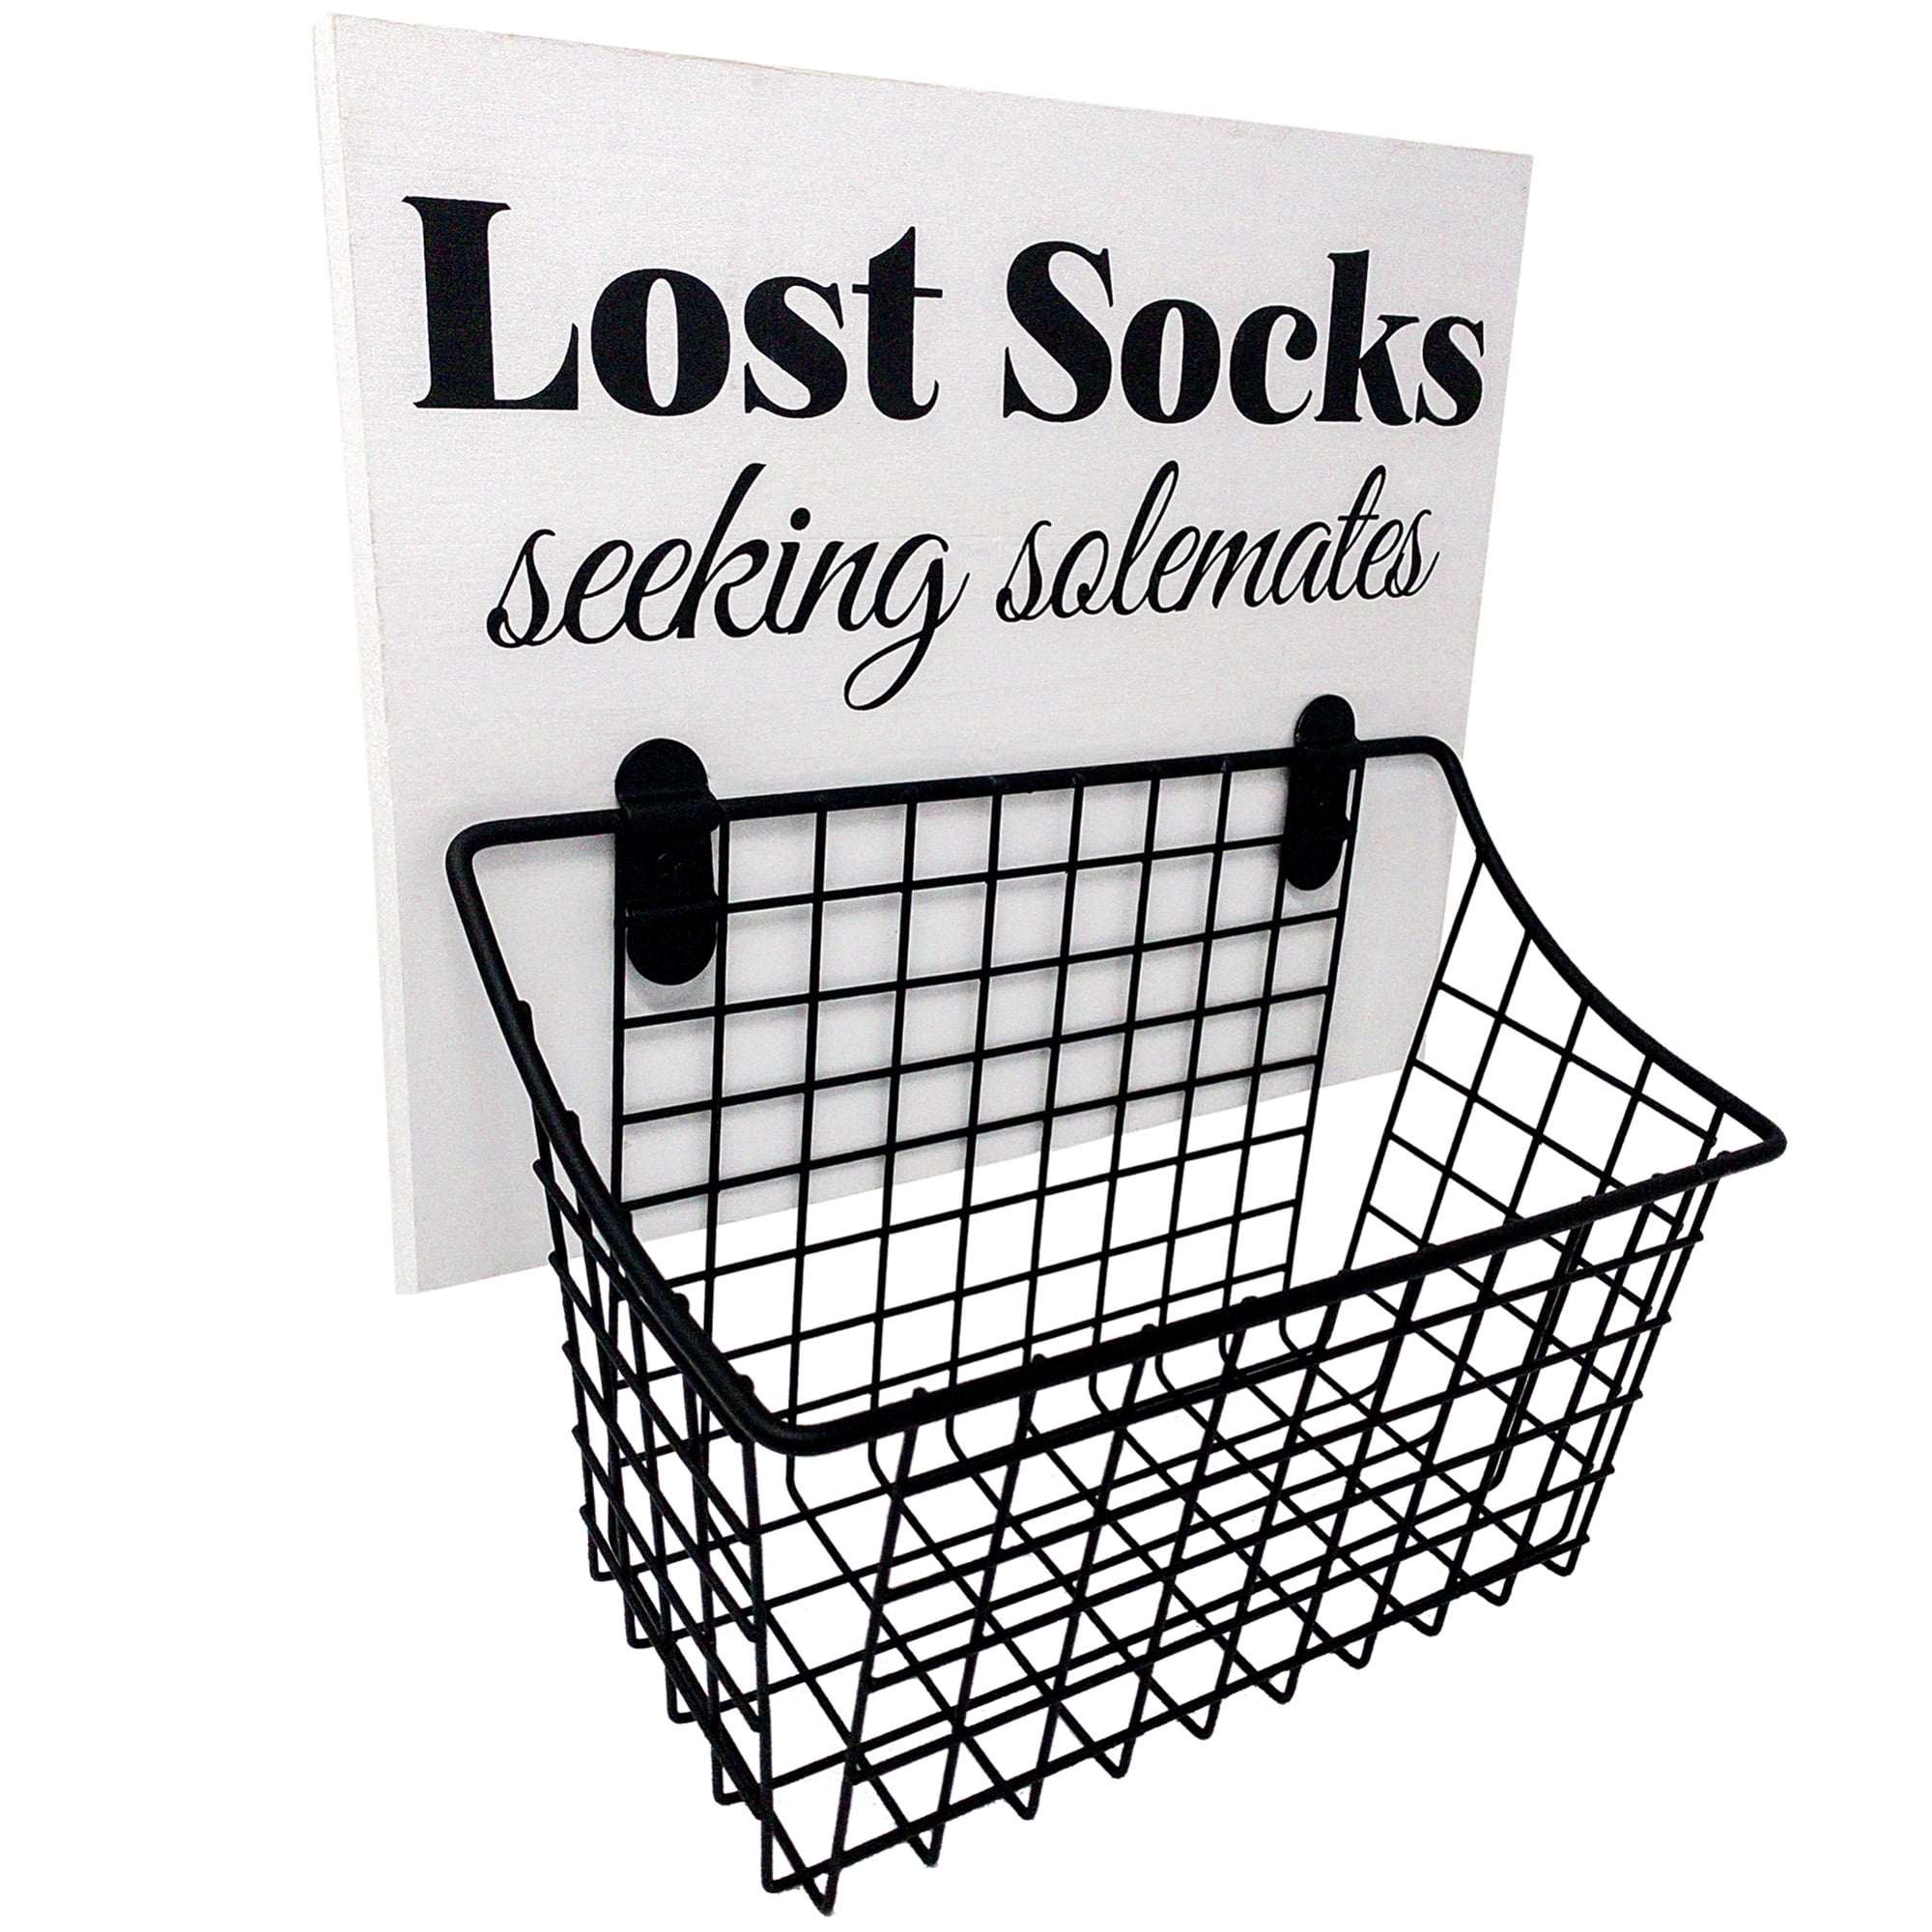 "LOST Socks Seeking SOLEMATES" Rustic Wall Stenciled Hanging Wooden Sign Laundry 